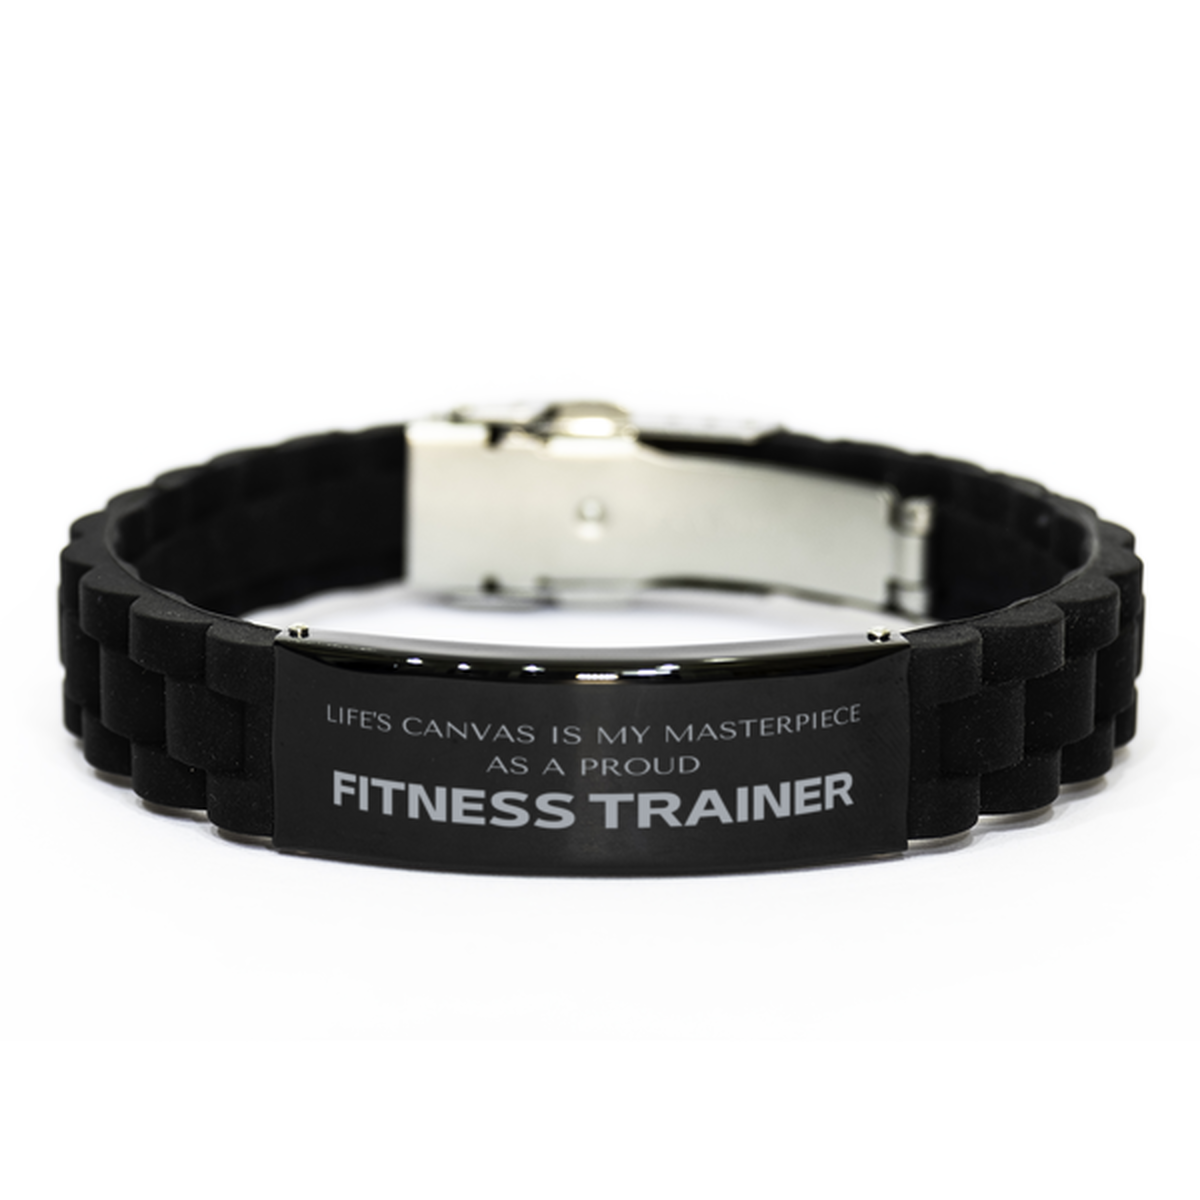 Proud Fitness Trainer Gifts, Life's canvas is my masterpiece, Epic Birthday Christmas Unique Black Glidelock Clasp Bracelet For Fitness Trainer, Coworkers, Men, Women, Friends